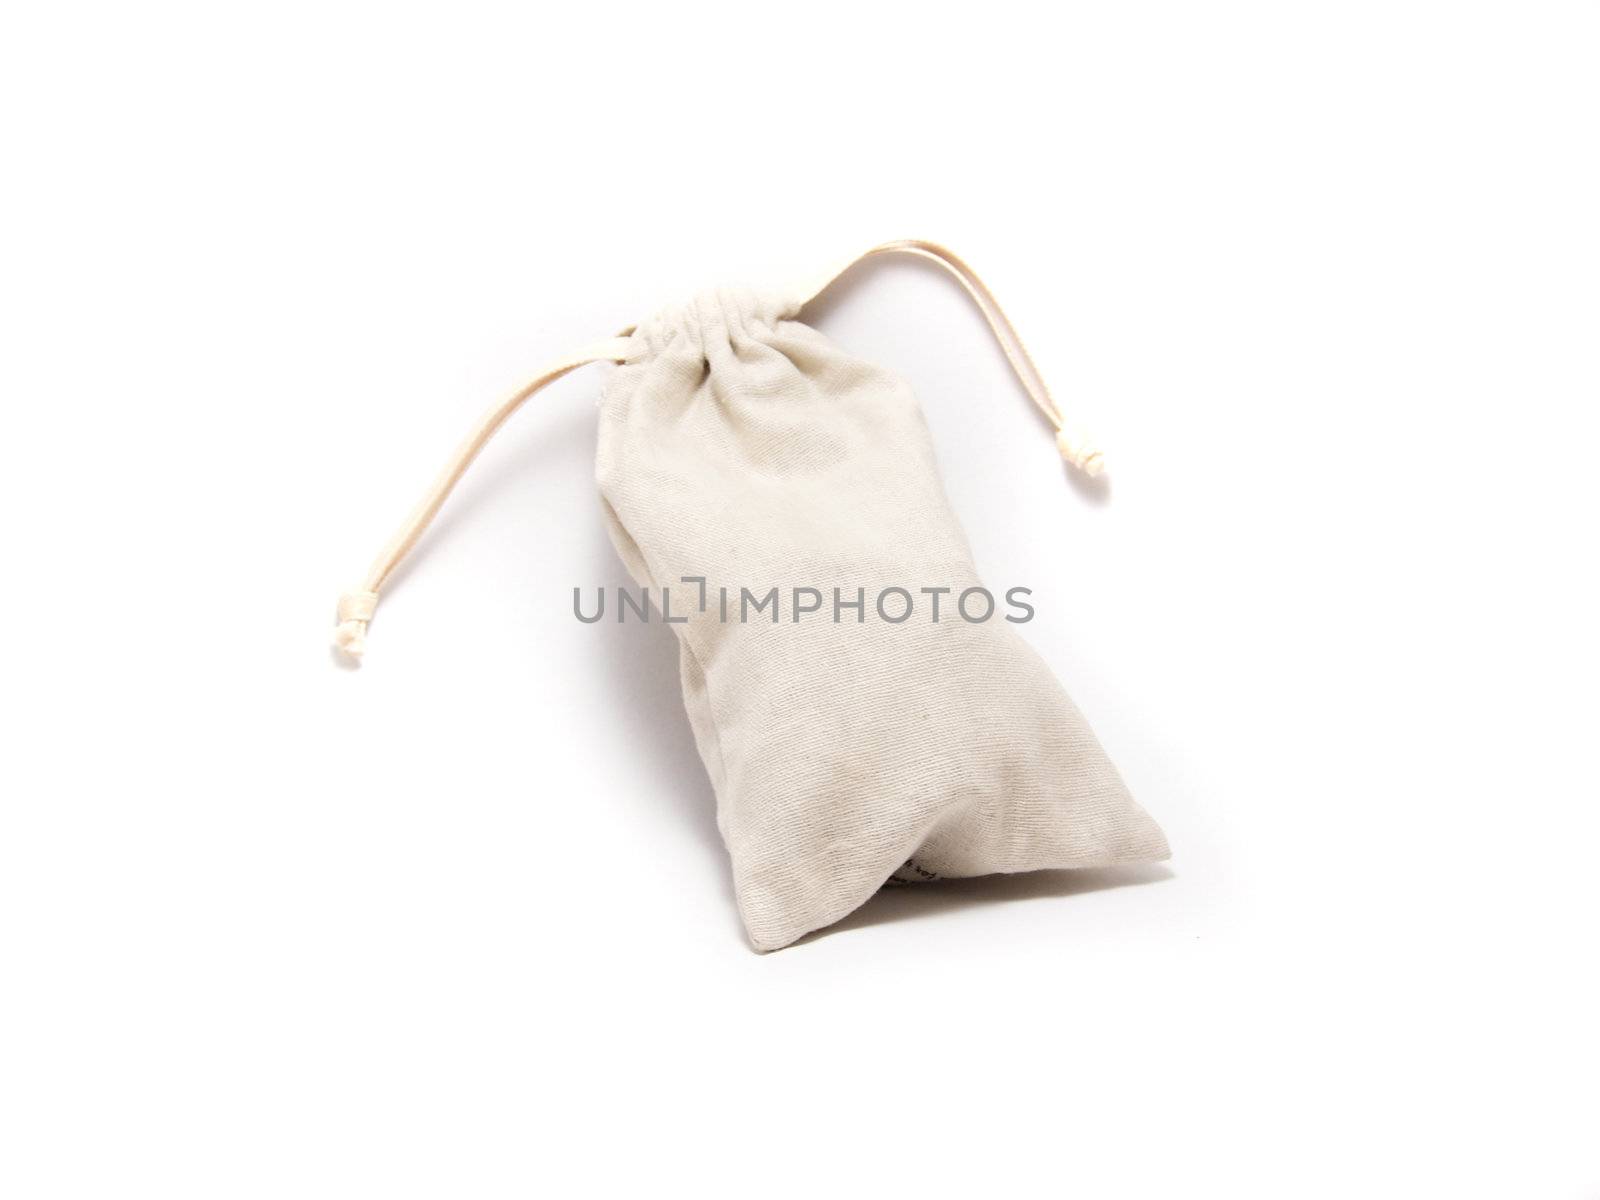 A Little Fabric Bag on white background